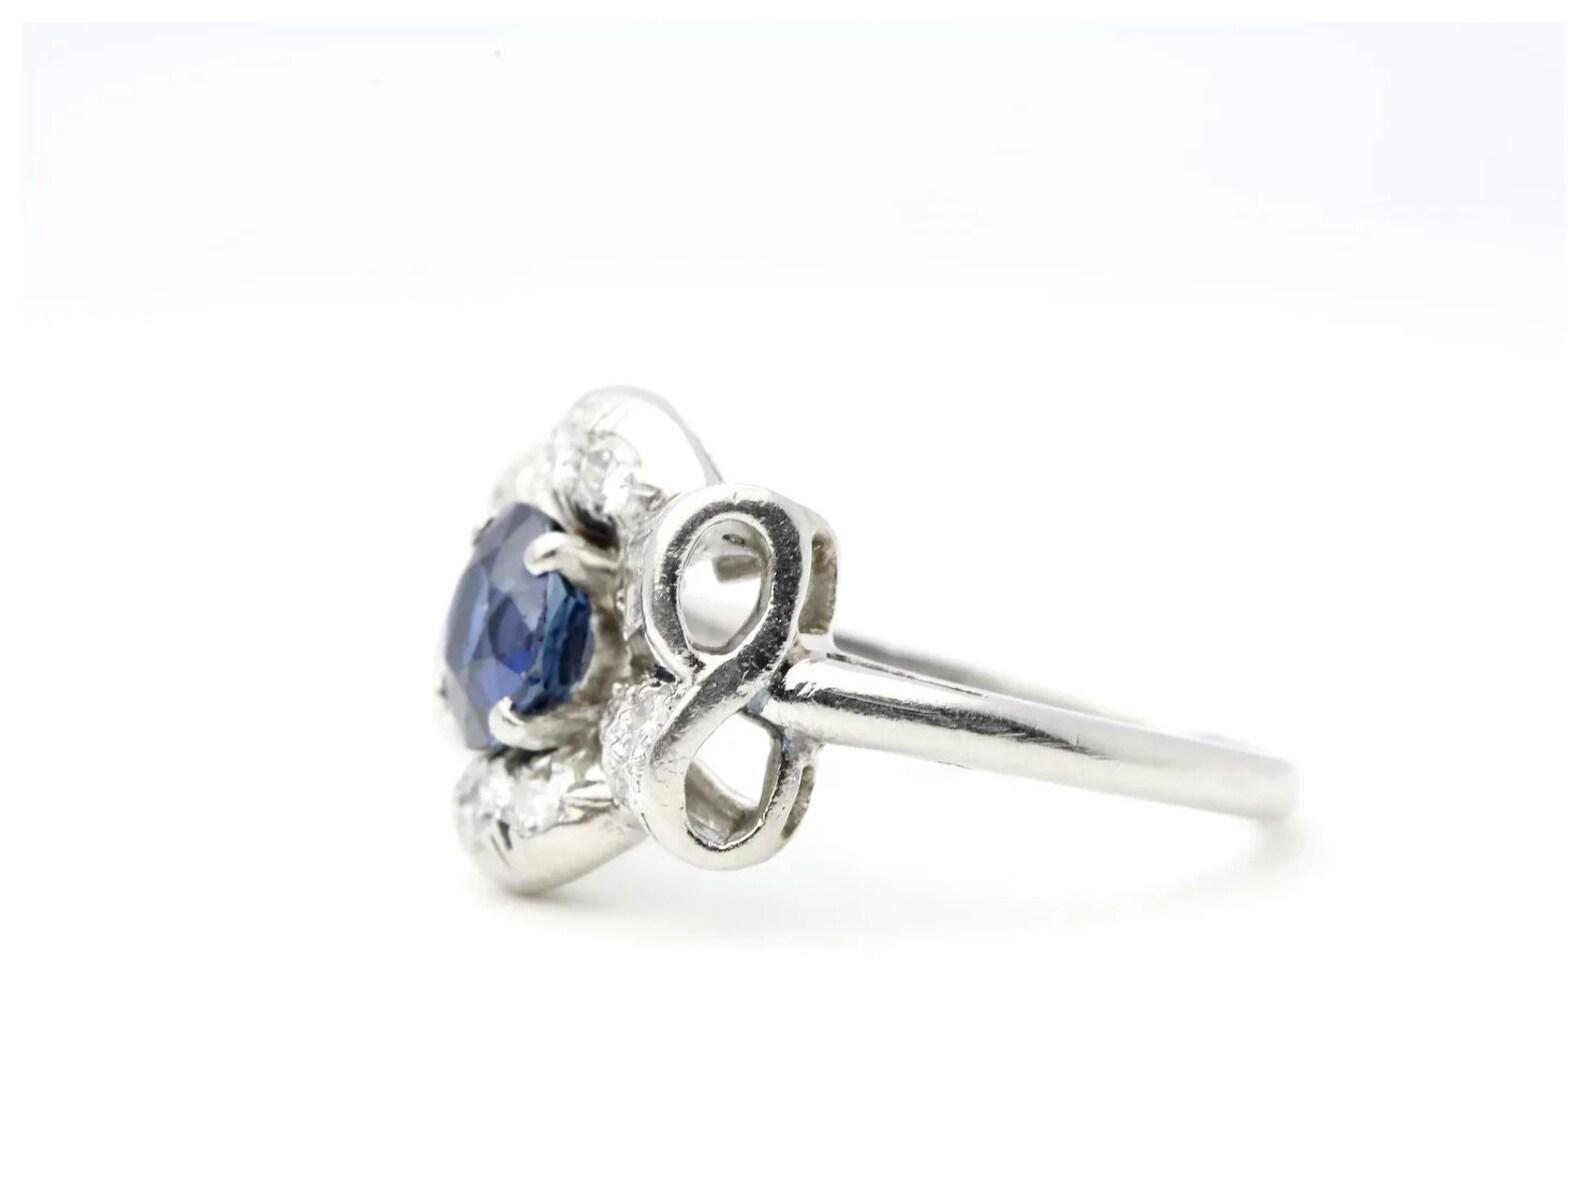 A late Art Deco period sapphire and diamond ring by noted jeweler Maurice Tishman of New York. Centered by a 1.05 Carat old European cut sapphire of beautiful rich blue color, and VS1 clarity. The handmade mounting features a ribbon inspired design,